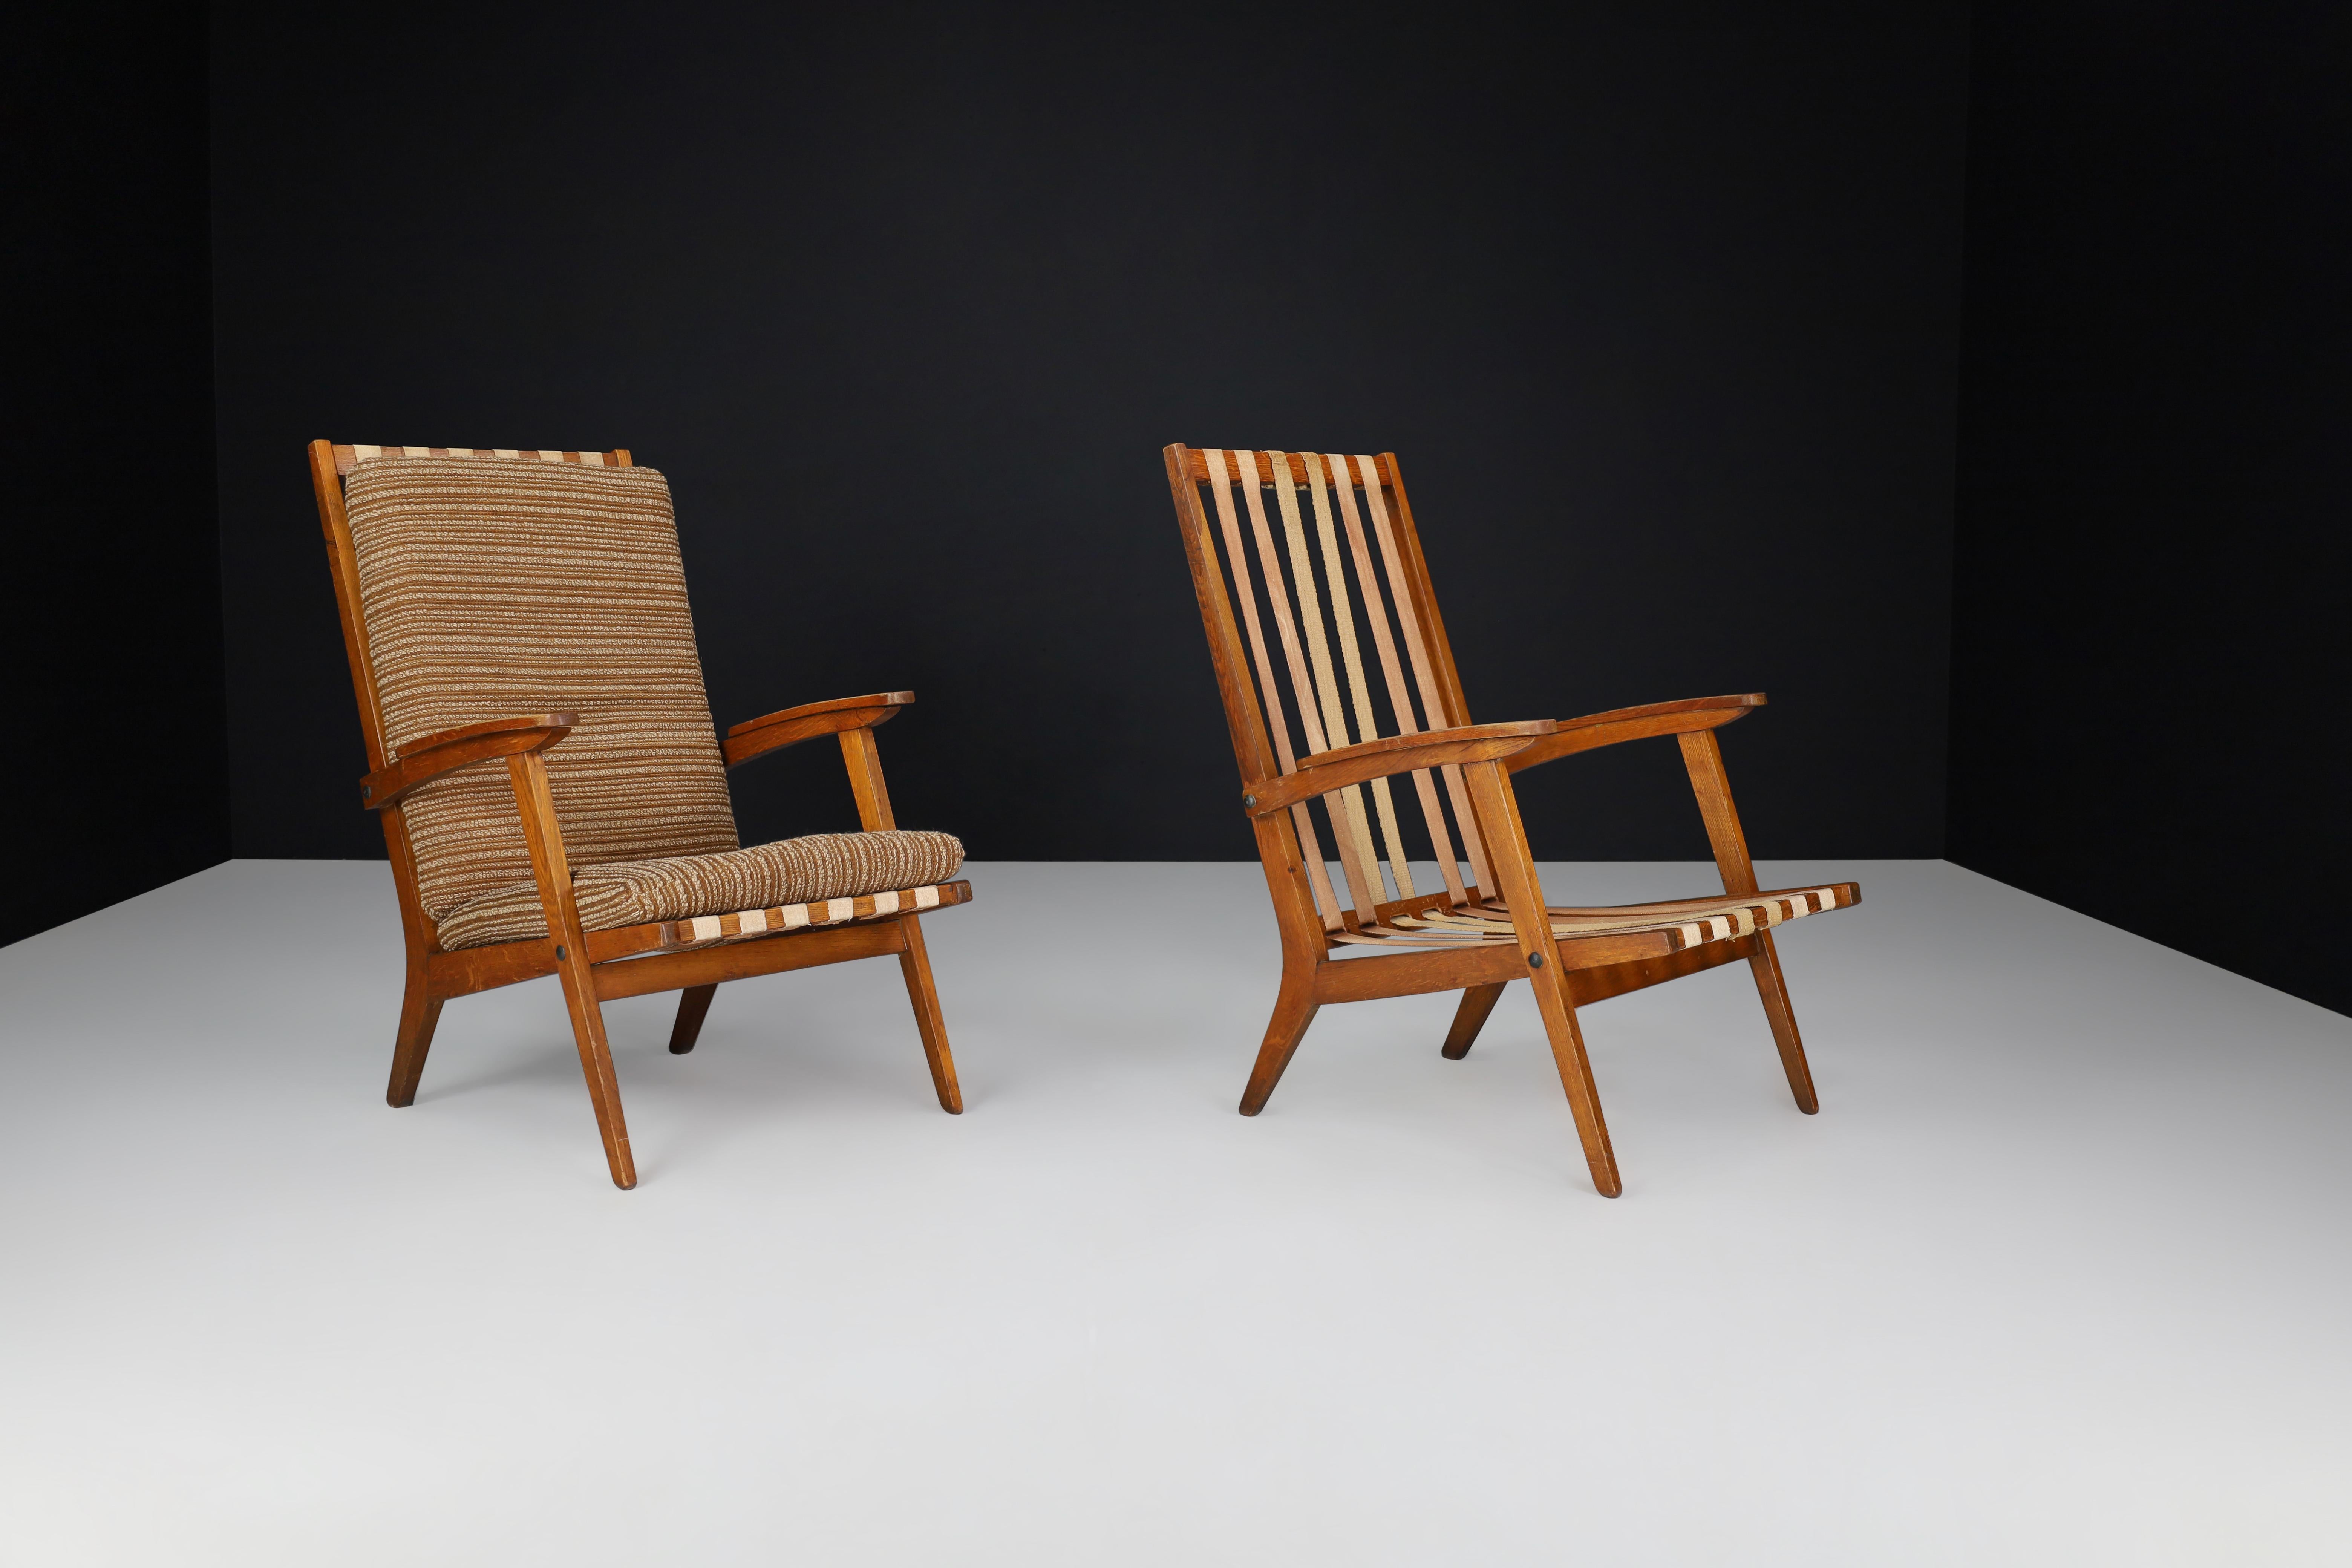 Oak Sculptural Lounge Chairs with Brown Upholstery, France, 1950s For Sale 3